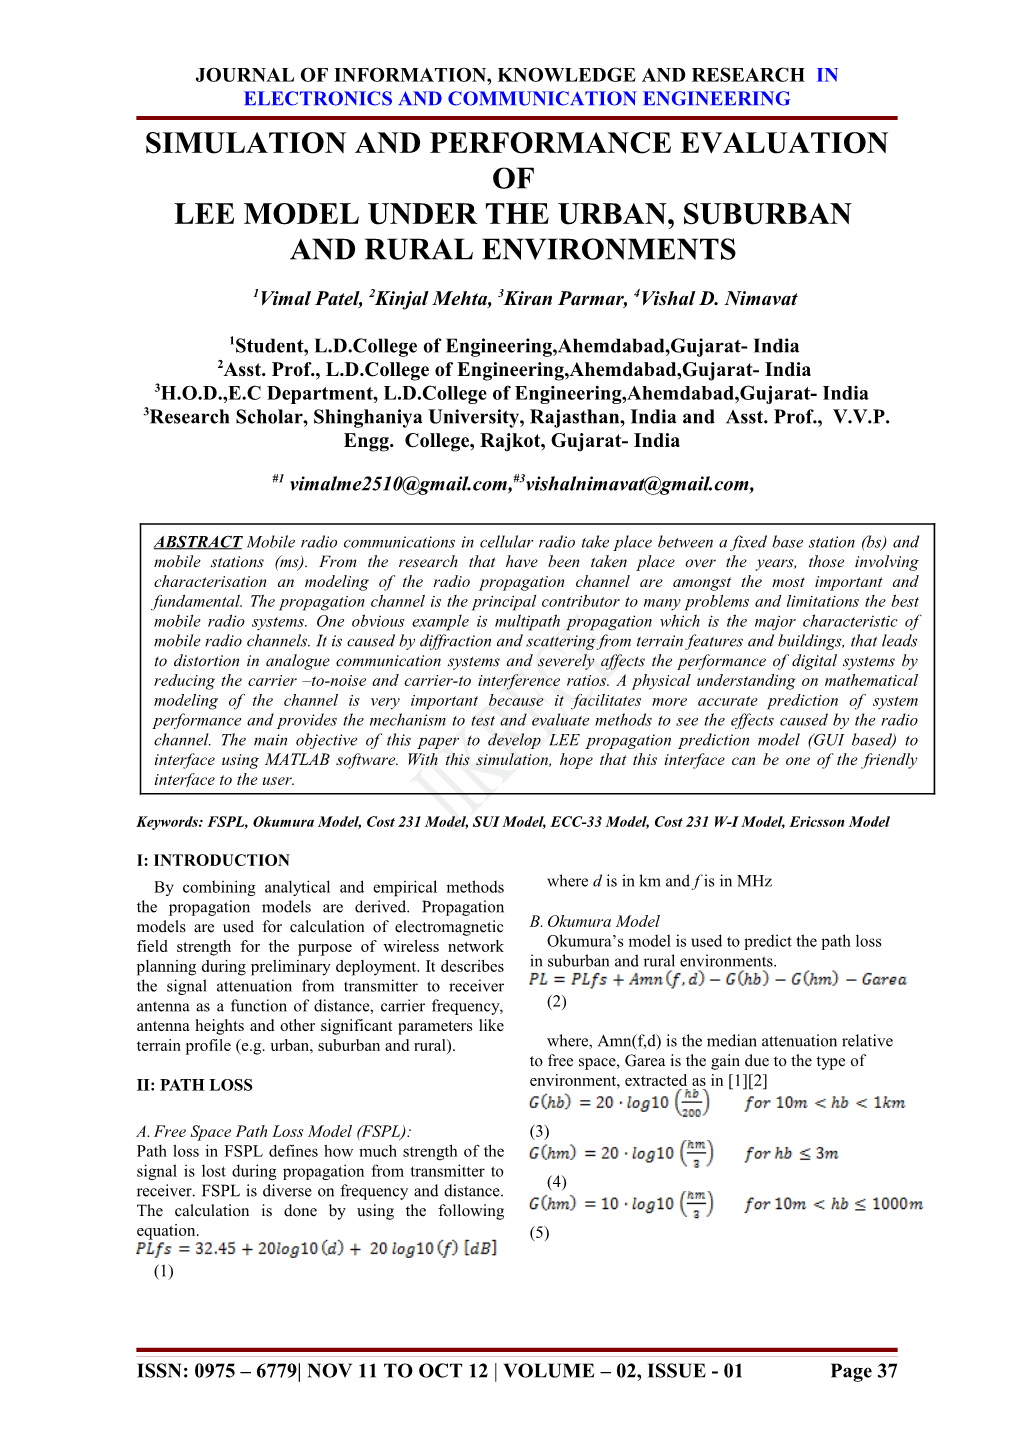 Simulation and Performance Evaluation Of